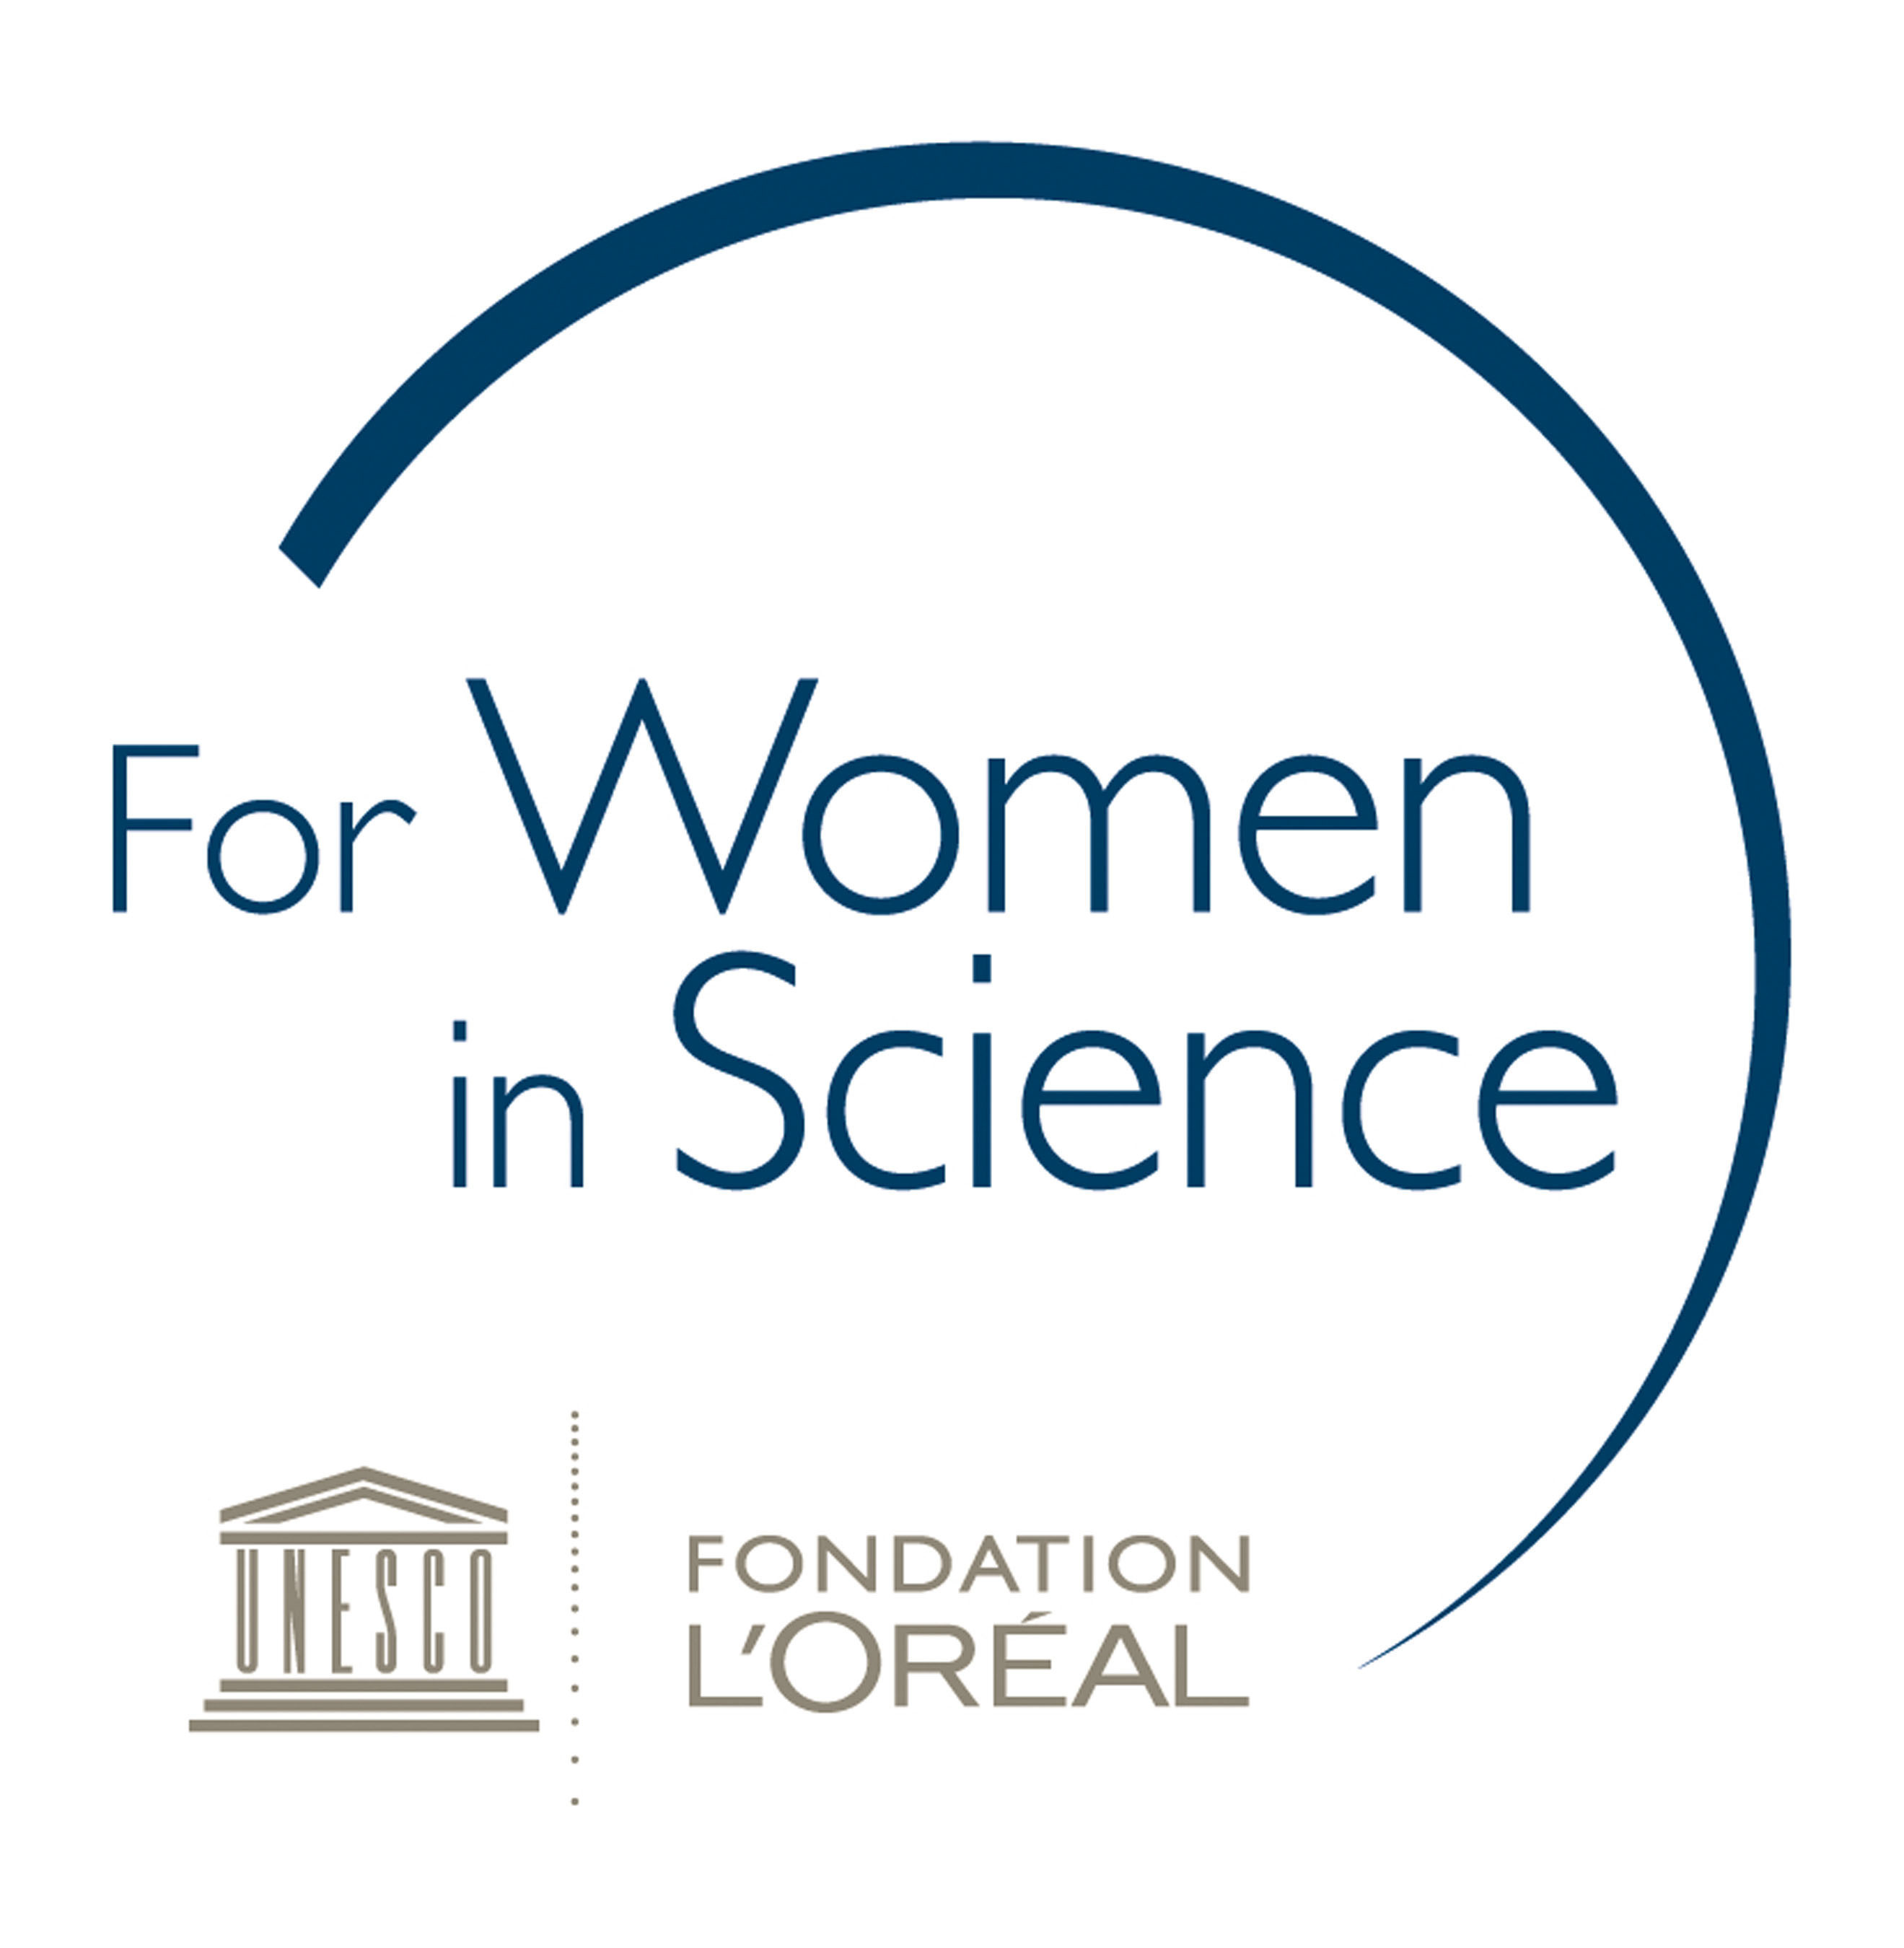 L'Oreal-UNESCO For Women in Science